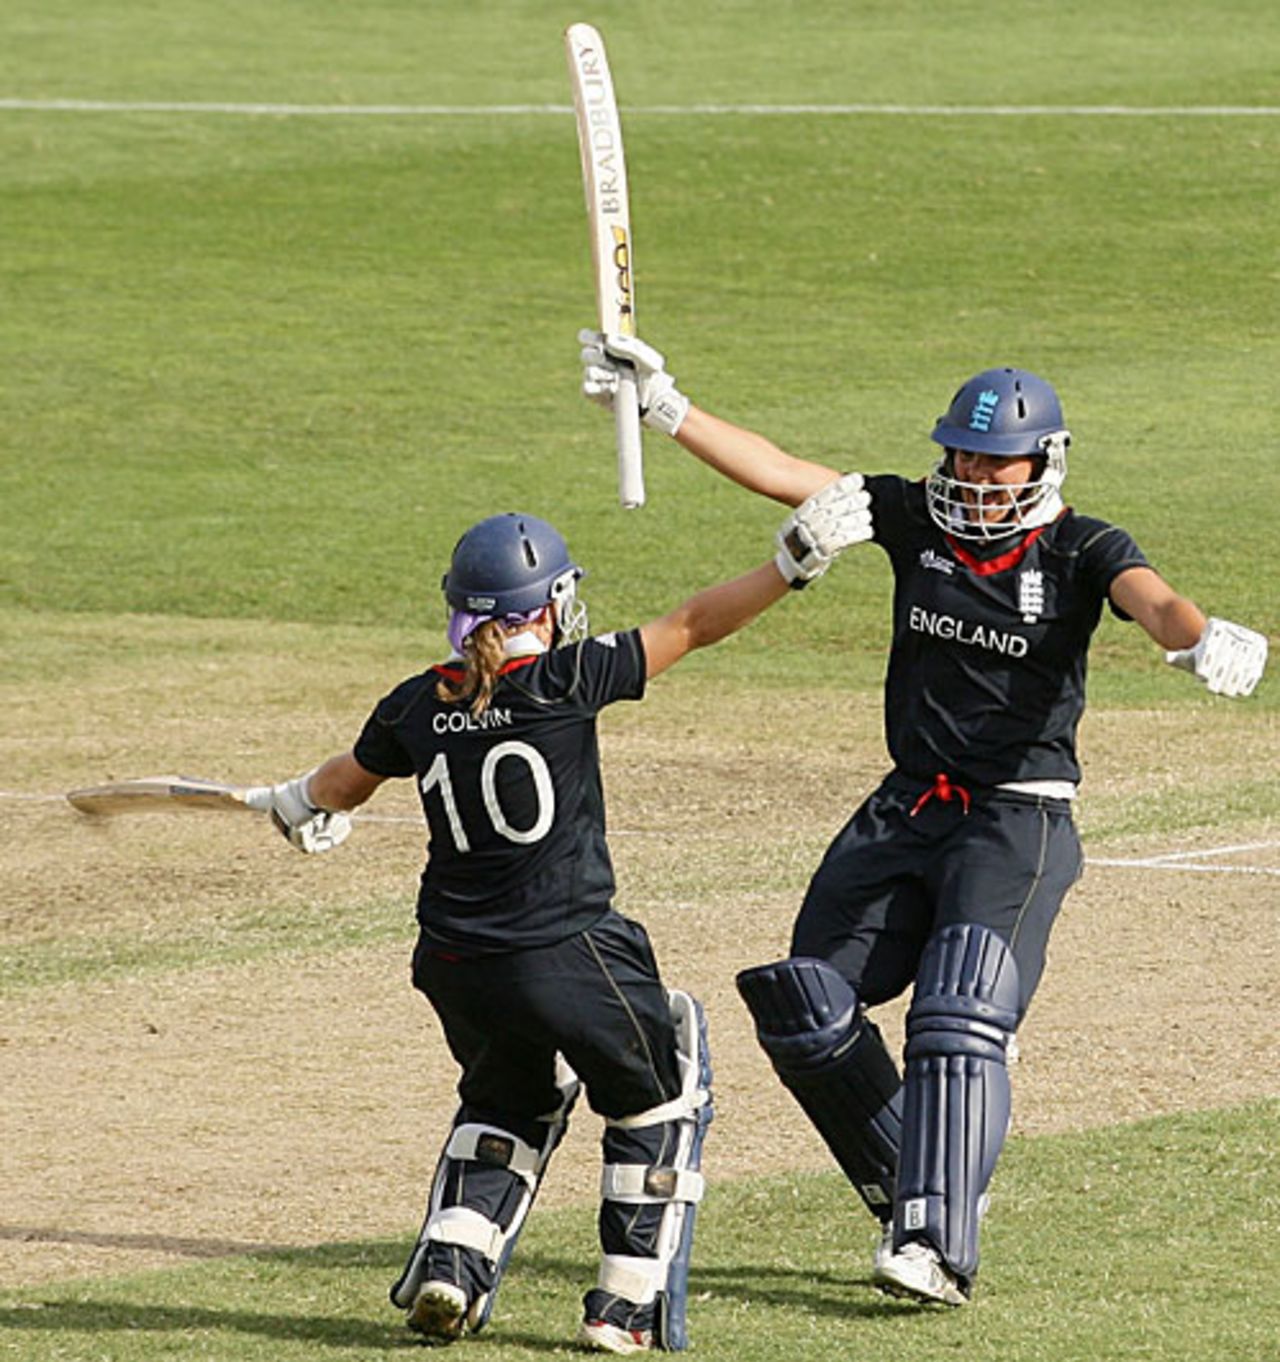 Holly Colvin celebrates with Nicky Shaw after hitting the winning runs, England v New Zealand, women's World Cup final, Sydney, March 22, 2009